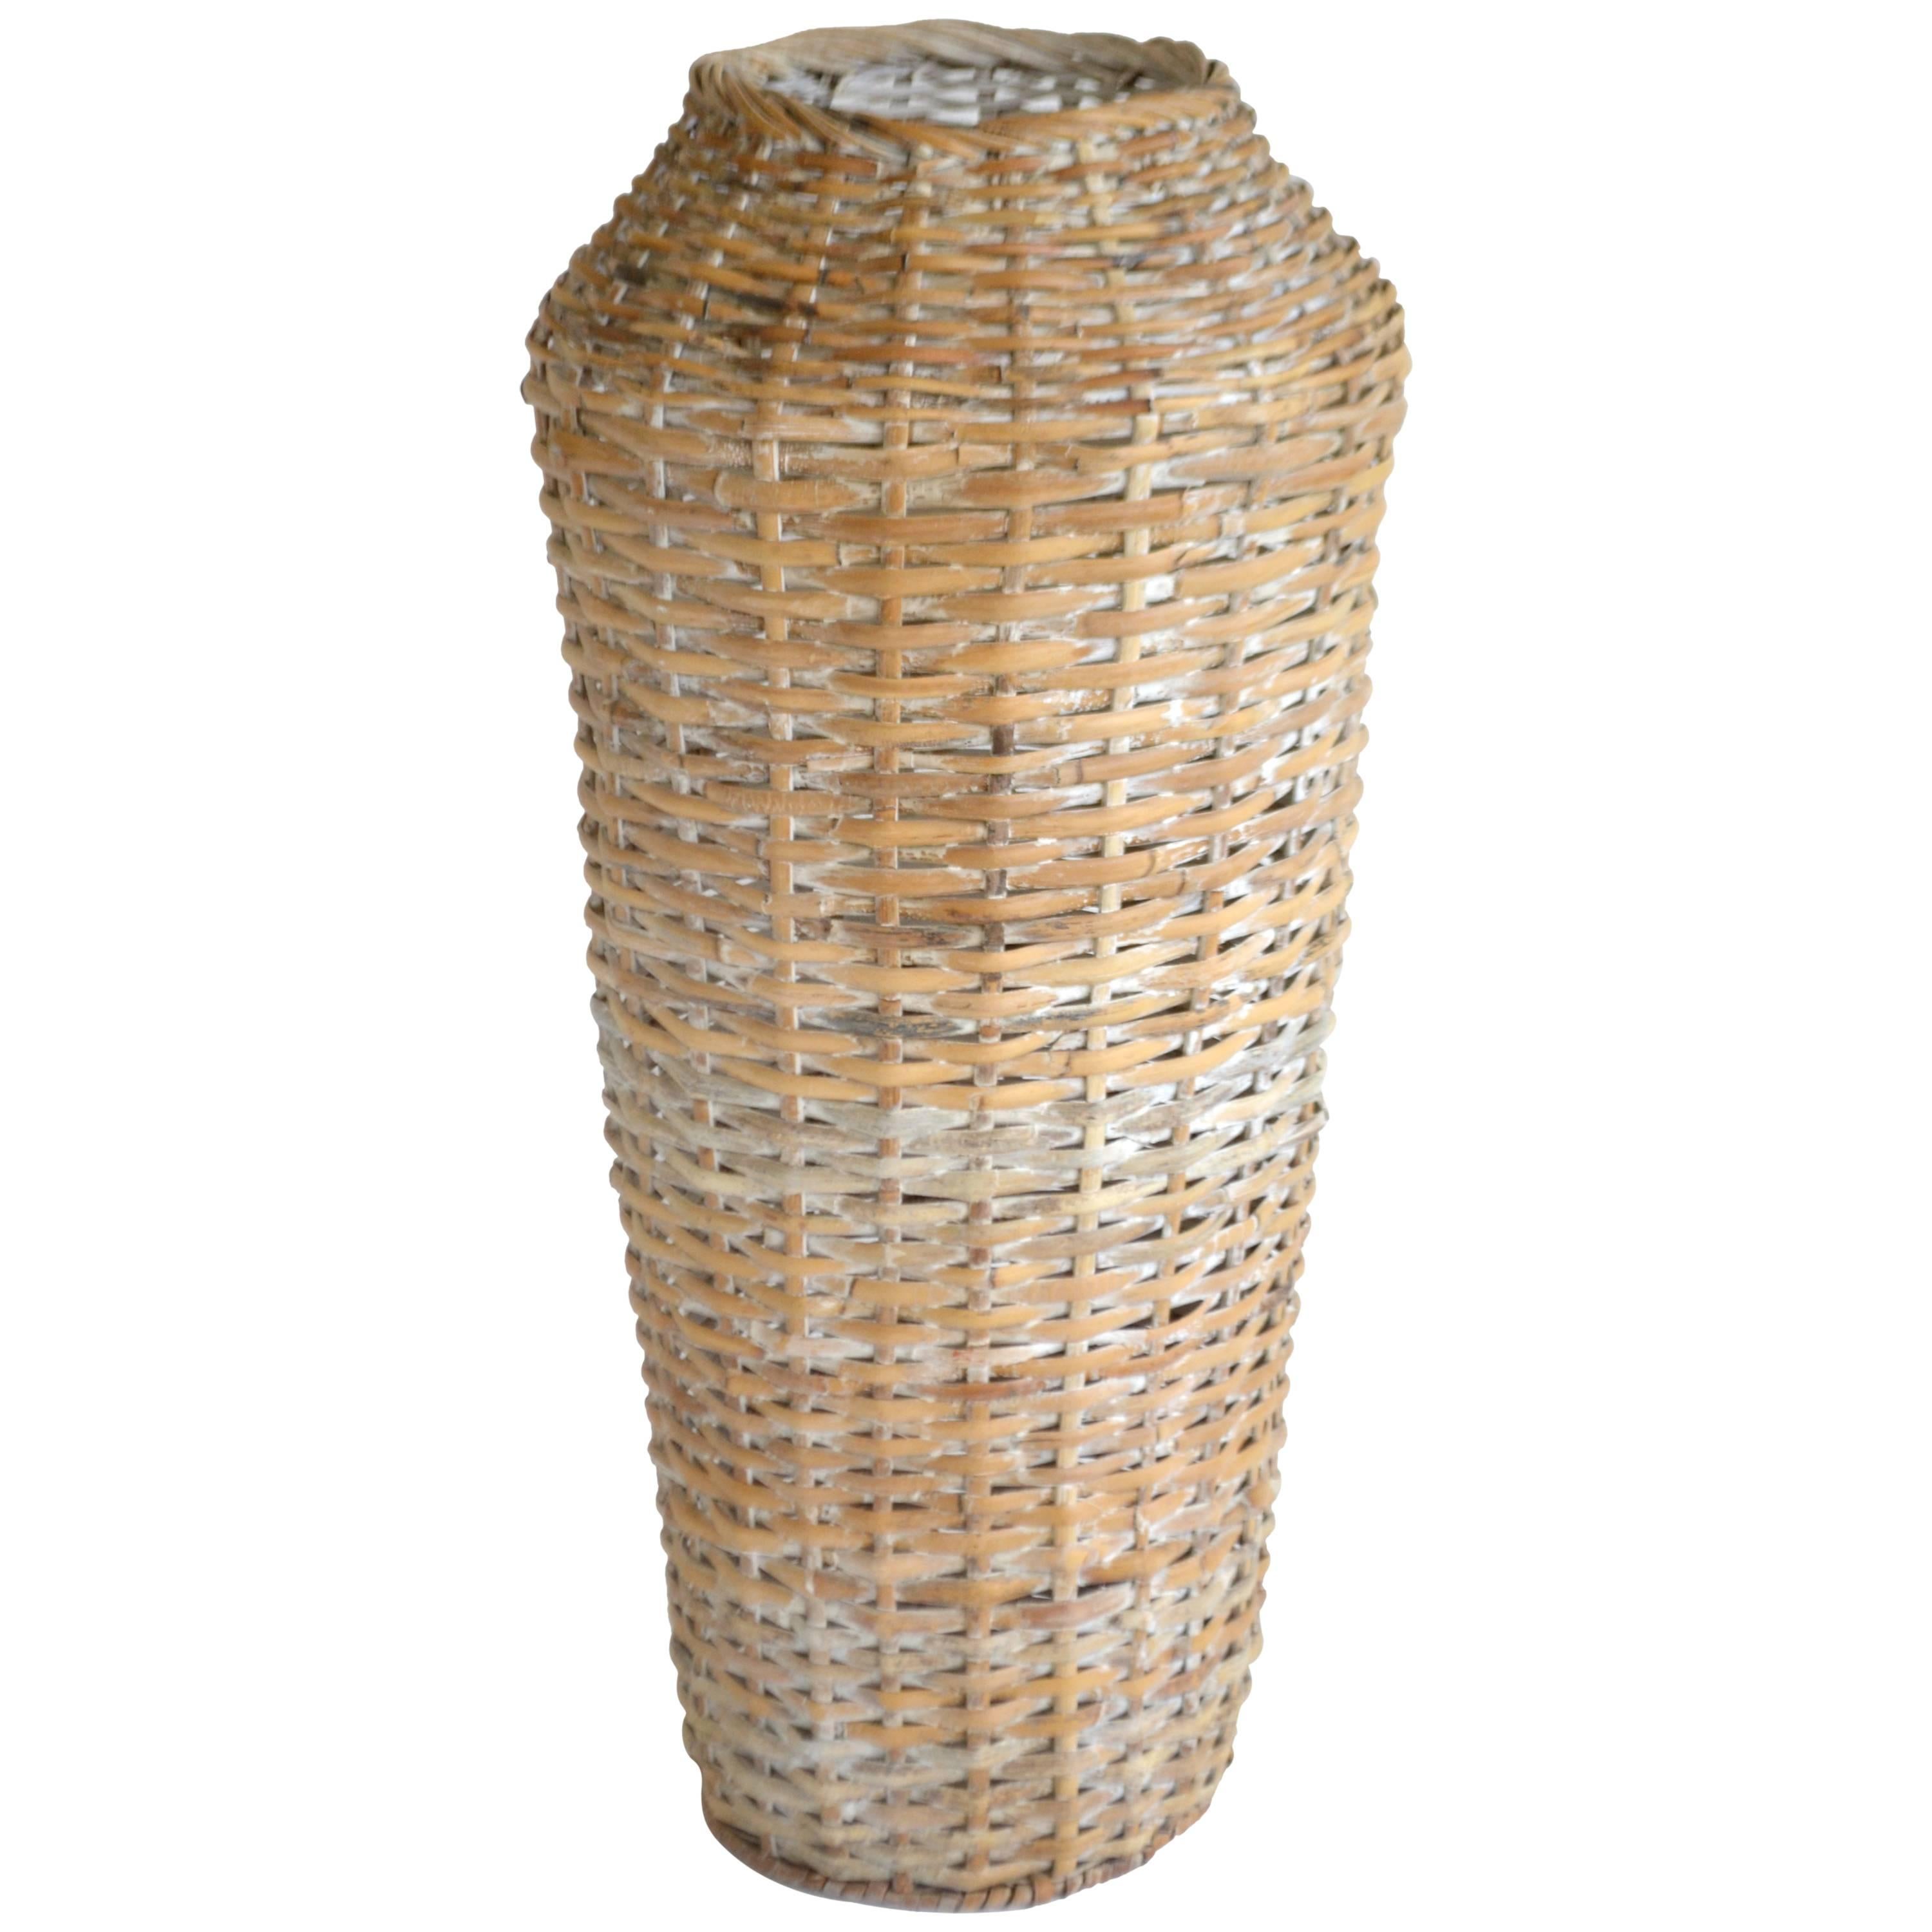 Sculptural Whitewashed Woven Rattan Basket For Sale 4